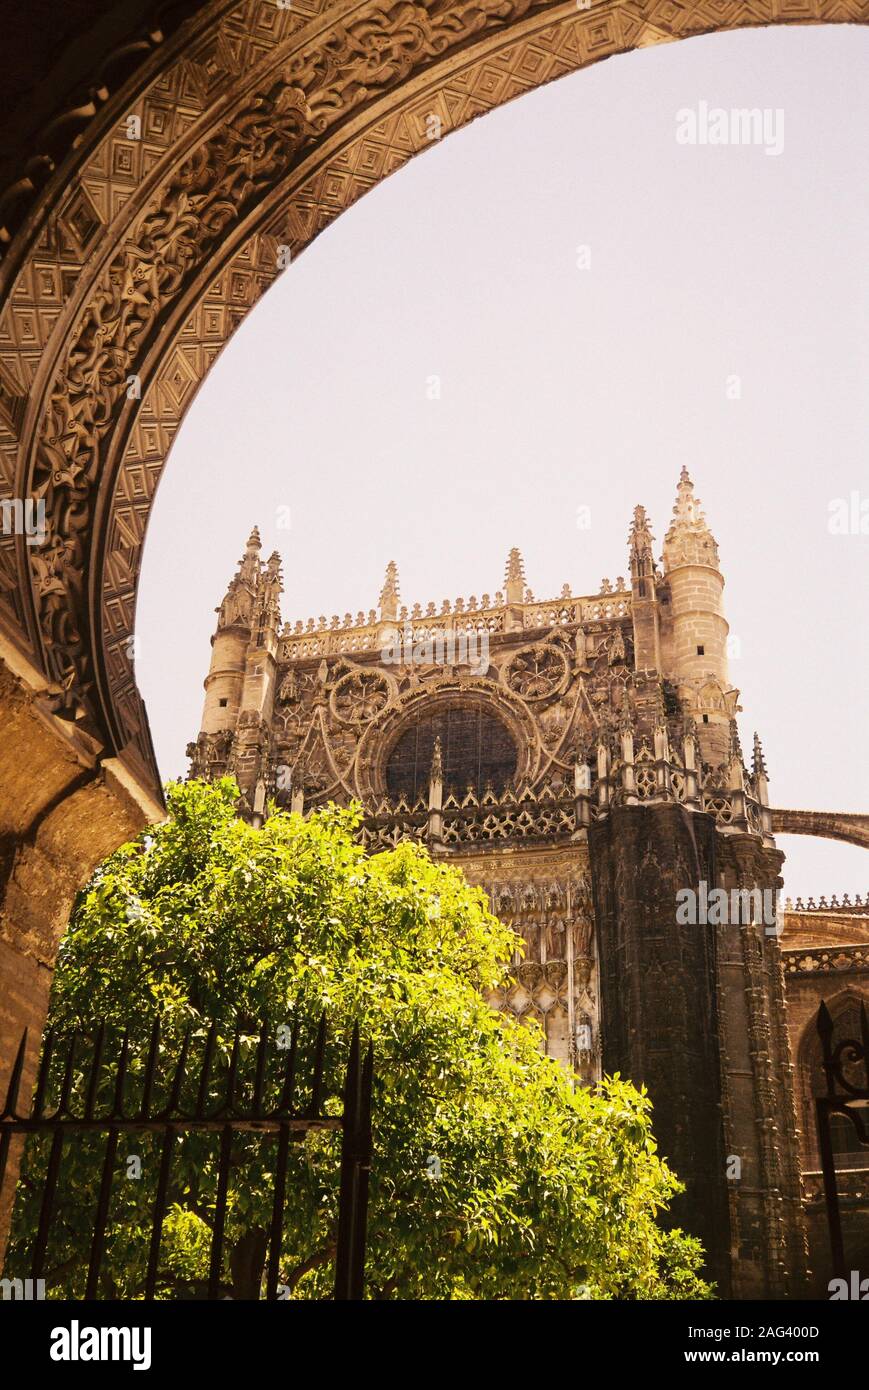 Vertical shot of the Giralda in Seville, Spain near green trees under the clear sky Stock Photo